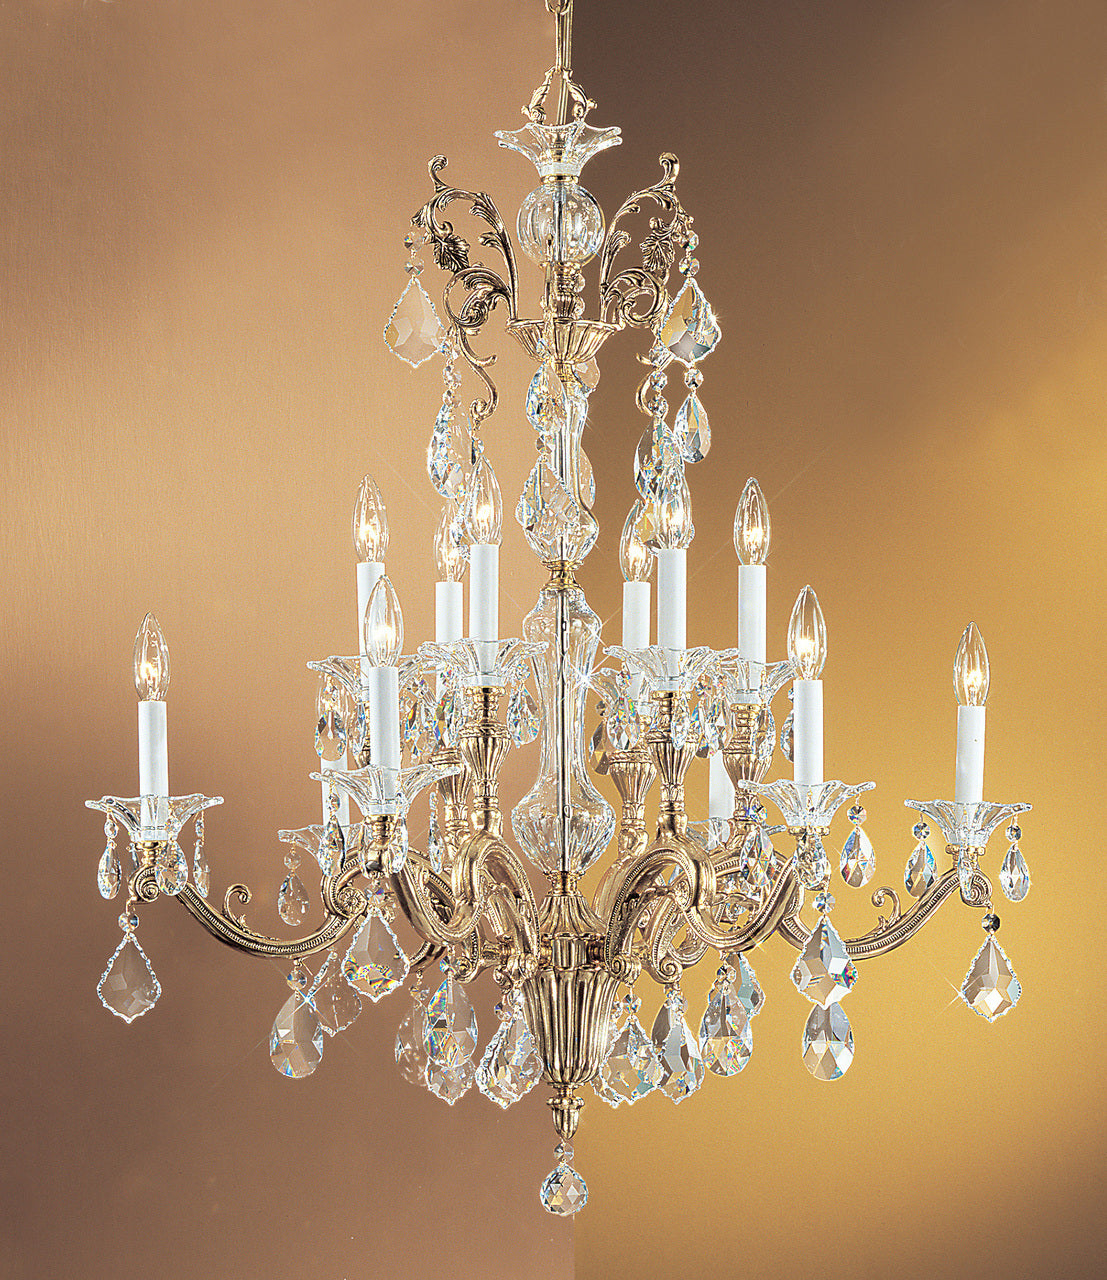 Classic Lighting 57112 BBK CSA Via Firenze Crystal Chandelier in Bronze/Black Patina (Imported from Spain)